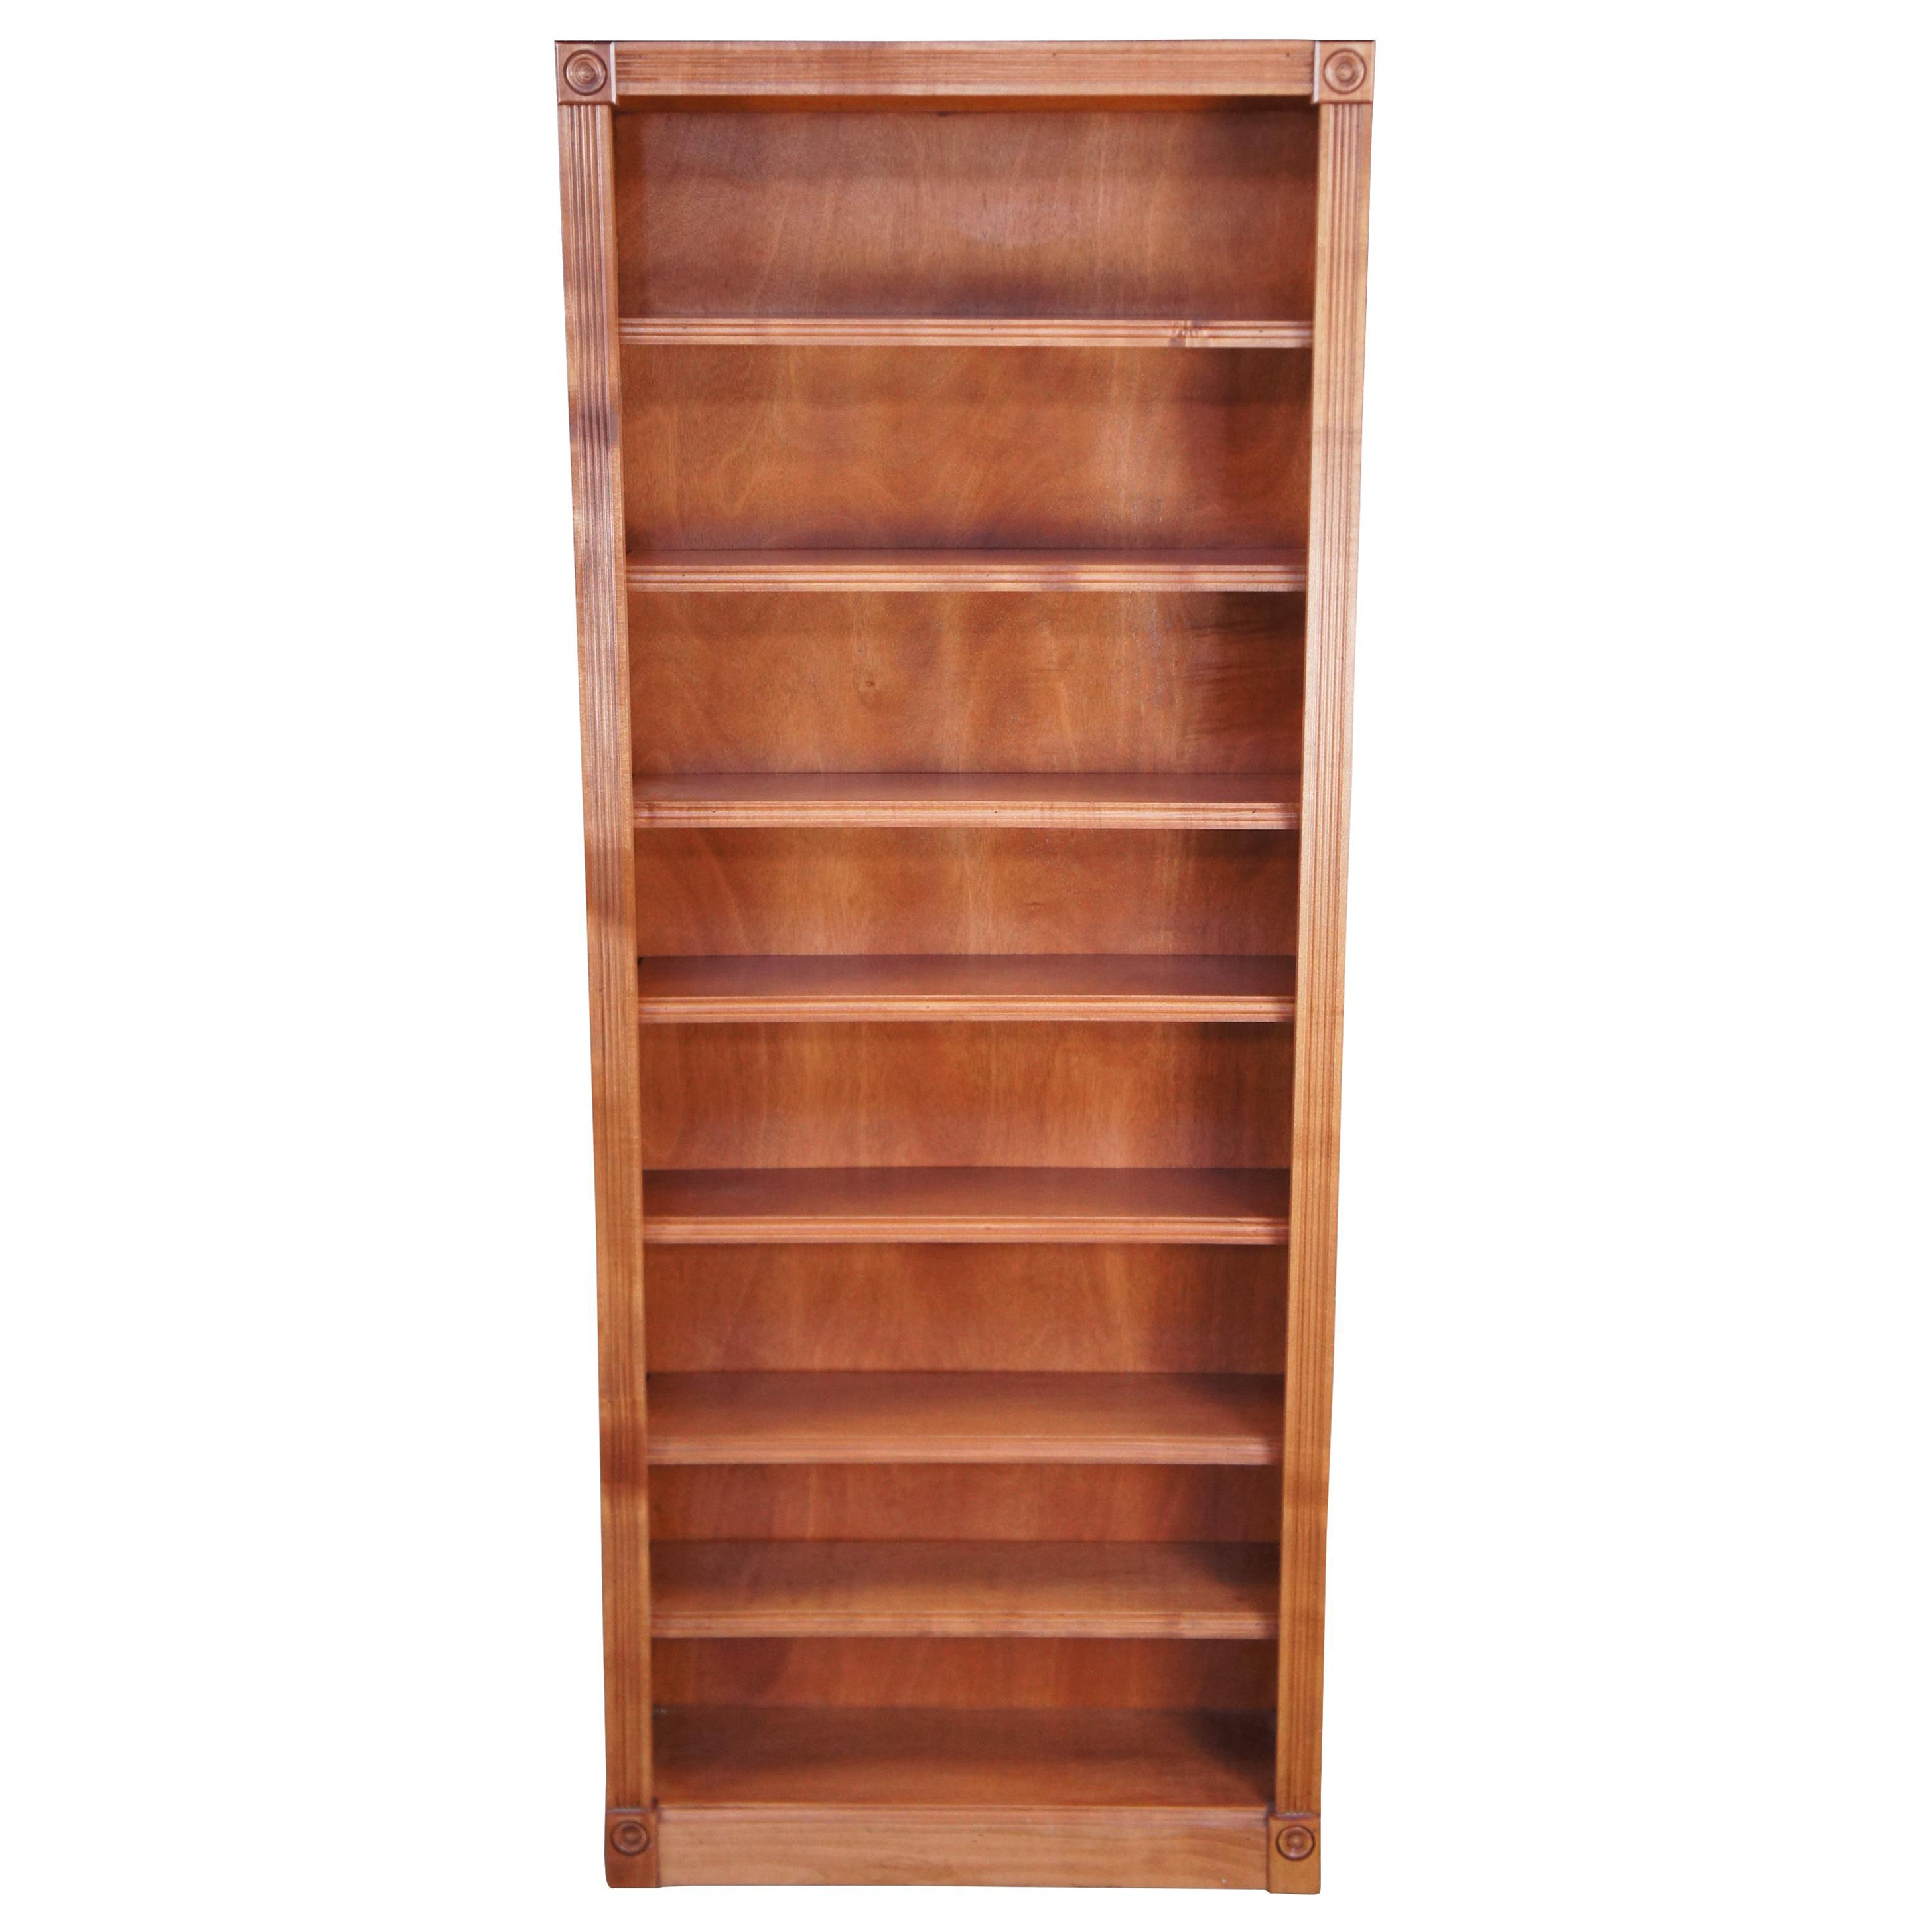 Late 20th Century Victorian Revival Cherry Tall Slender Narrow Bookcase CD